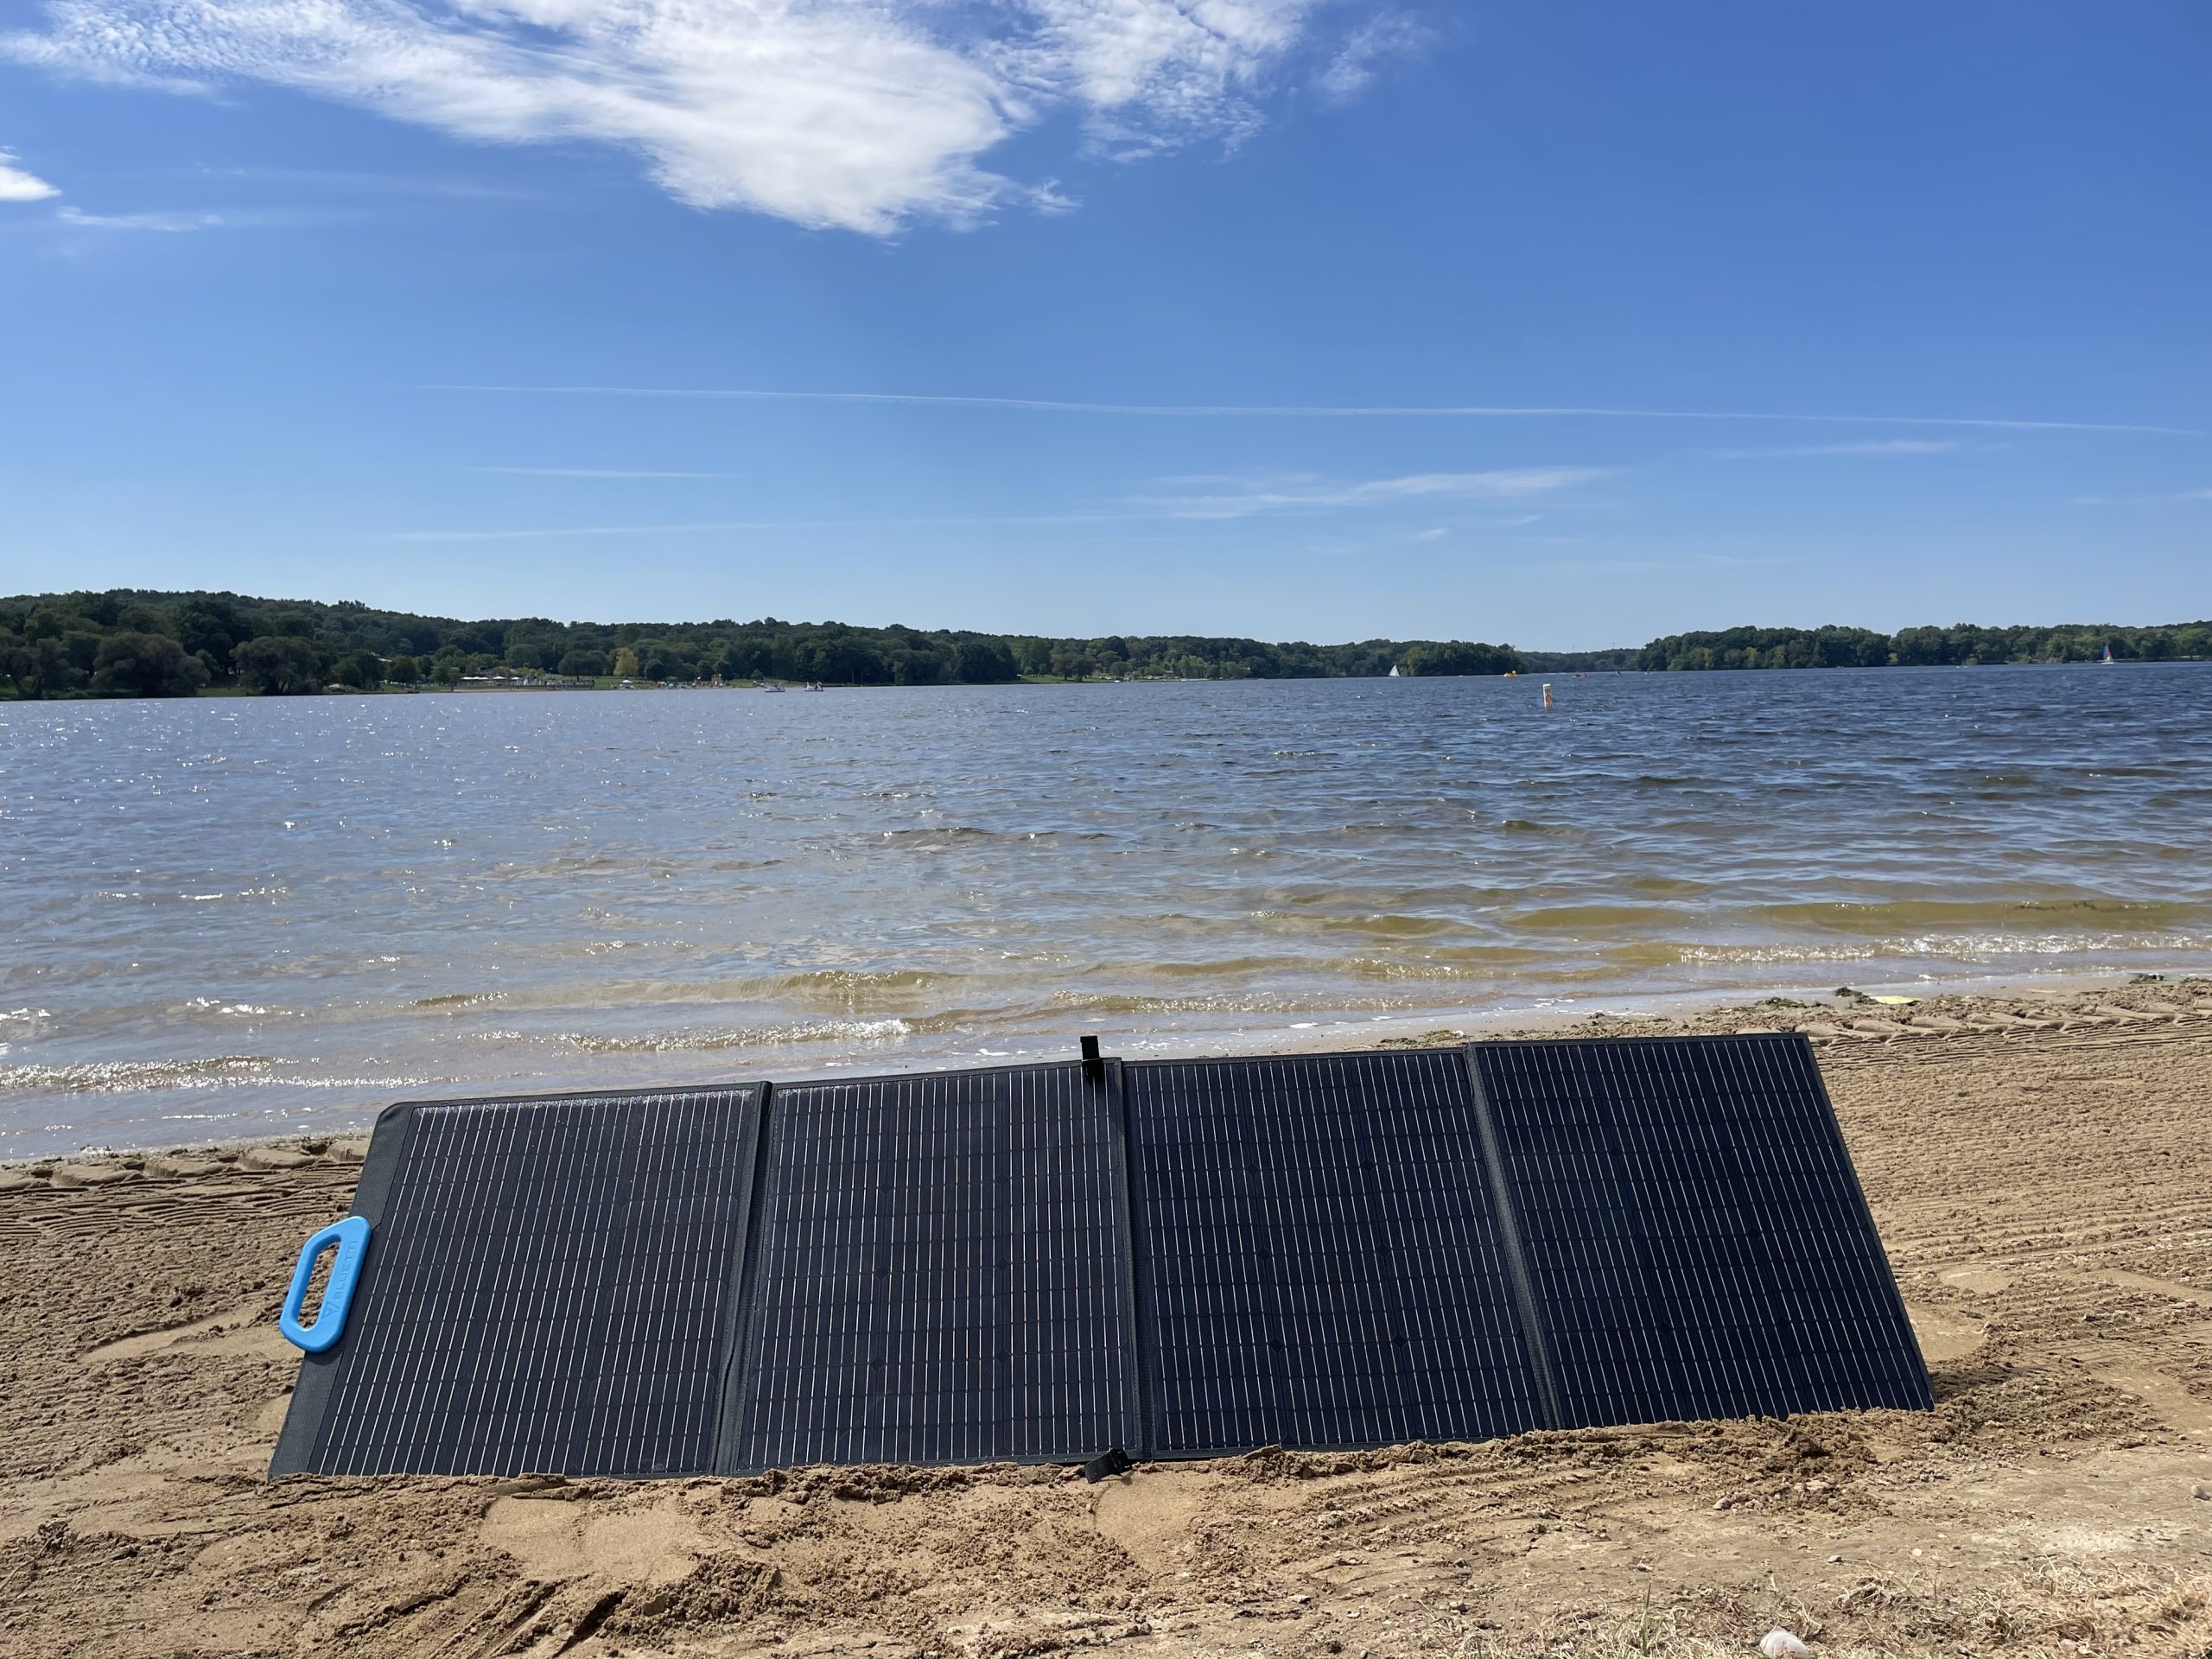 An In-Depth Review of the BLUETTI PV200 Solar Panel